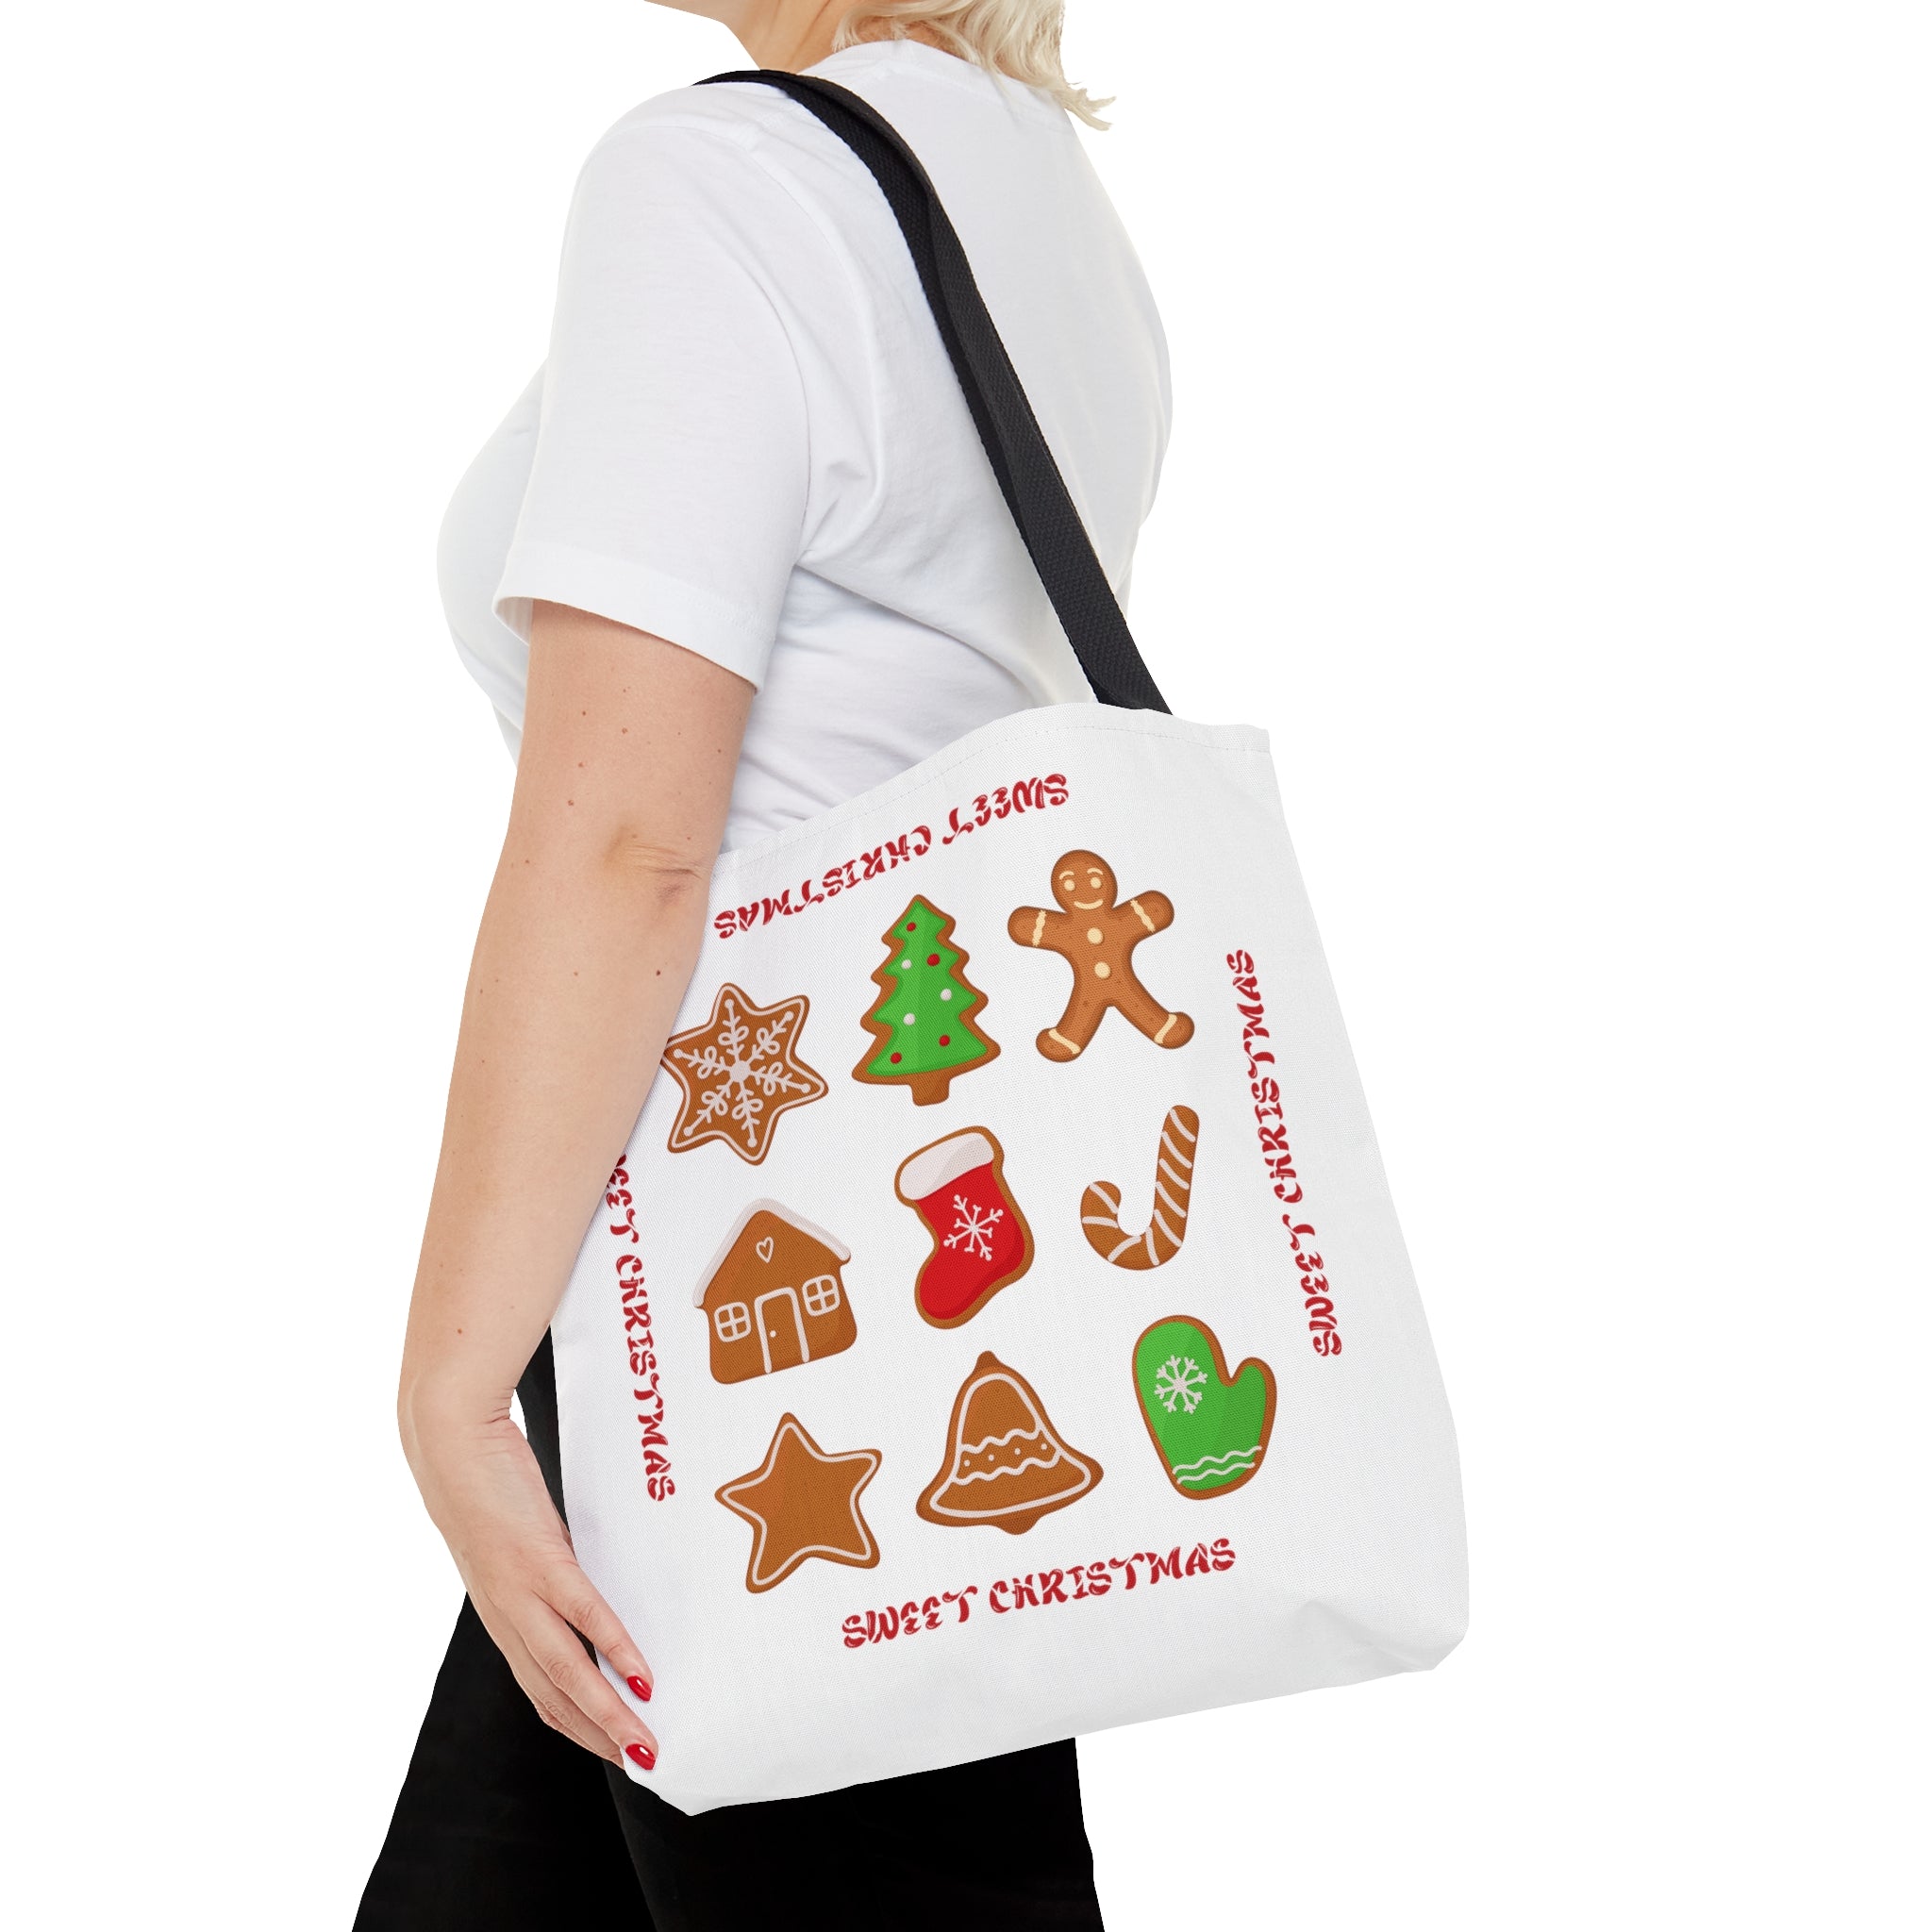 Sweet Christmas Tote Bag, Reusable Canvas Tote Bags, Available in Different Size